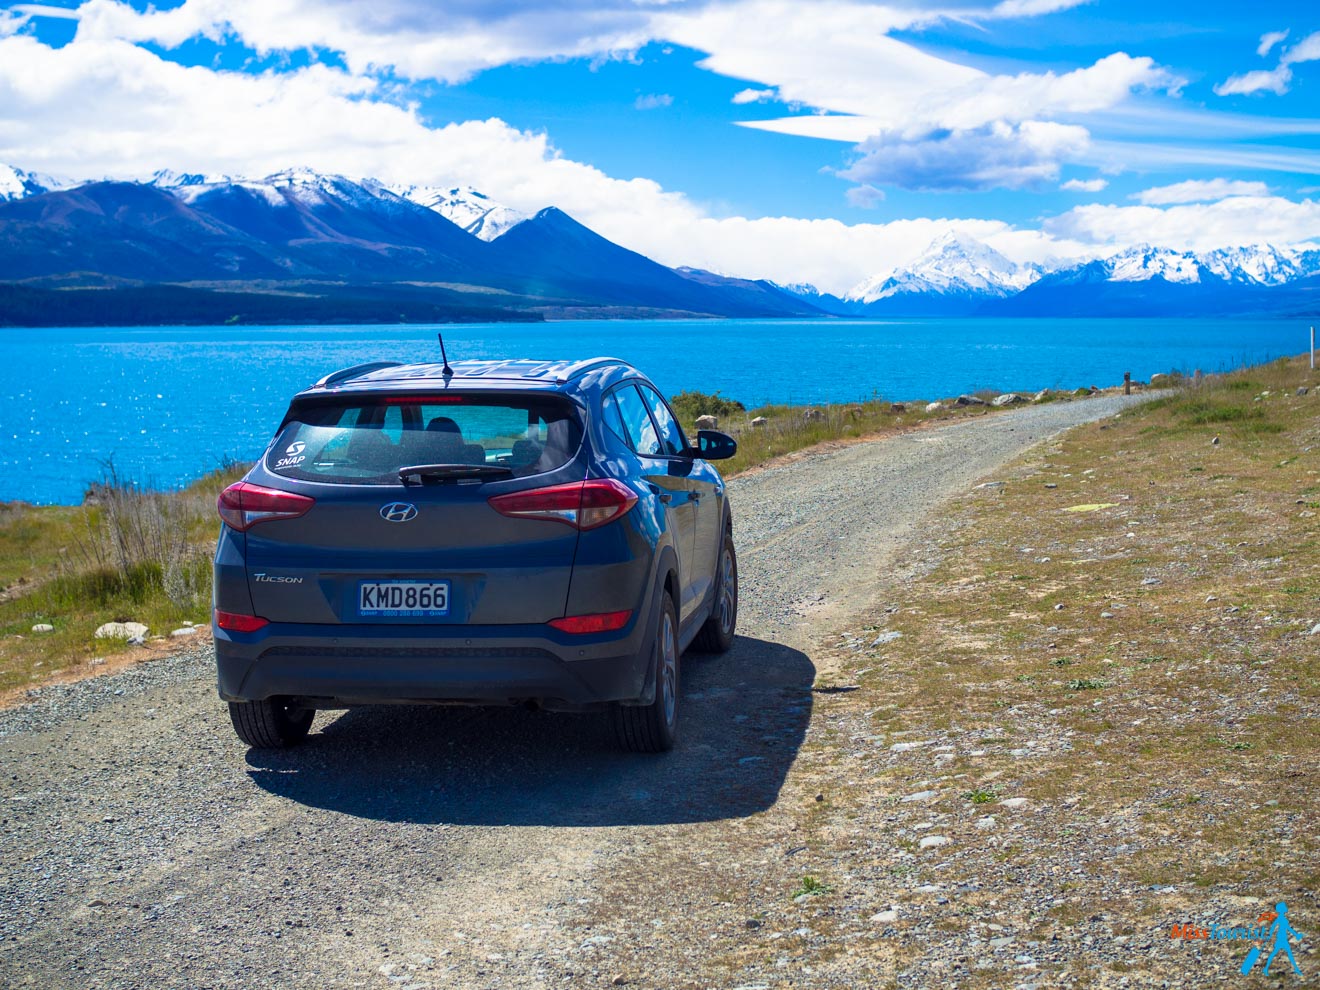 7 things you should know before renting a car in New Zealand 8